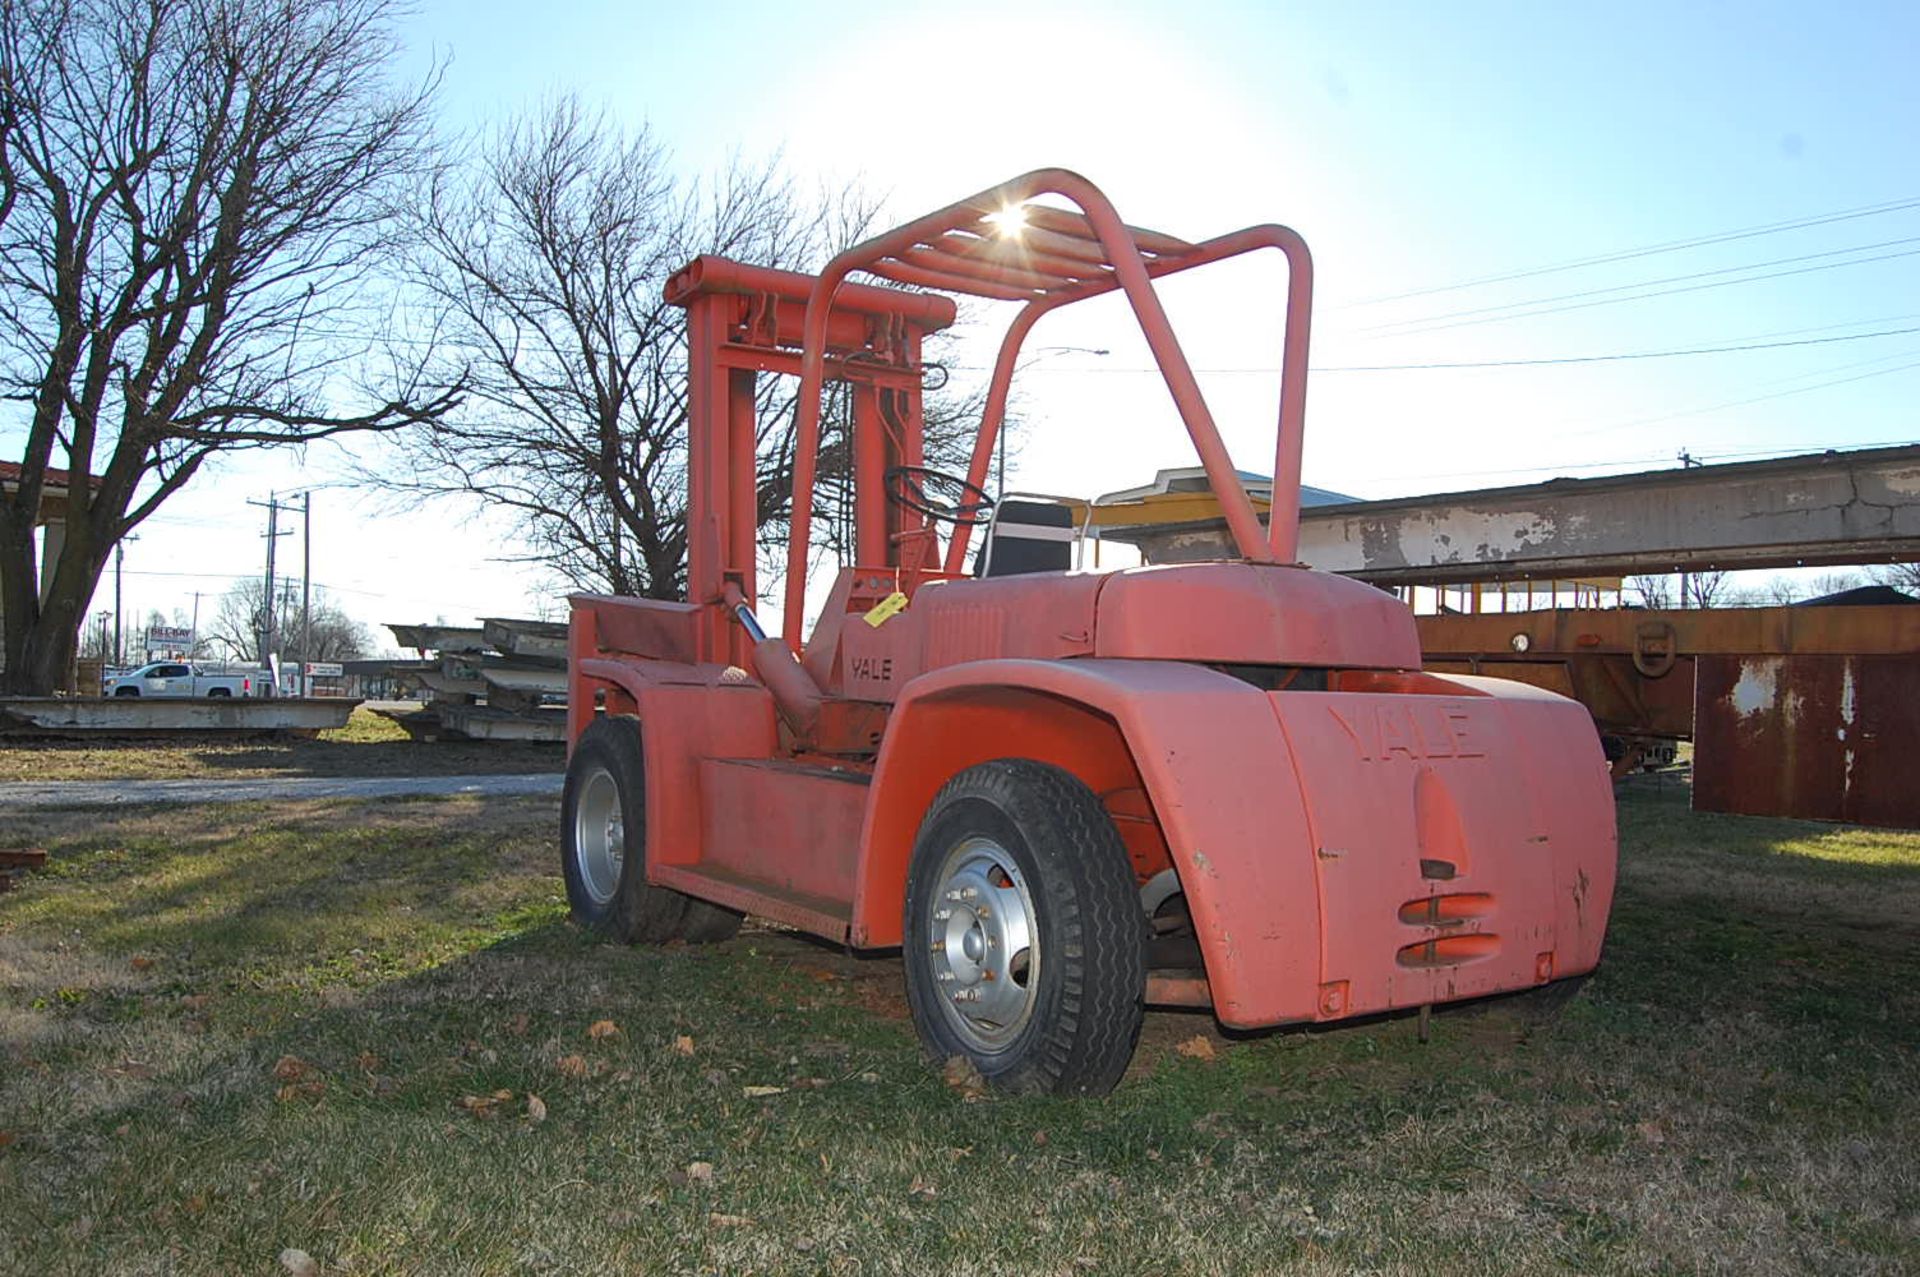 Yale Model #G3P-150-MO6-0 Fork Lift, Rated 15,000 lb. Lift Capacity, 24 in. Lift Height, SN H103222 - Image 2 of 2